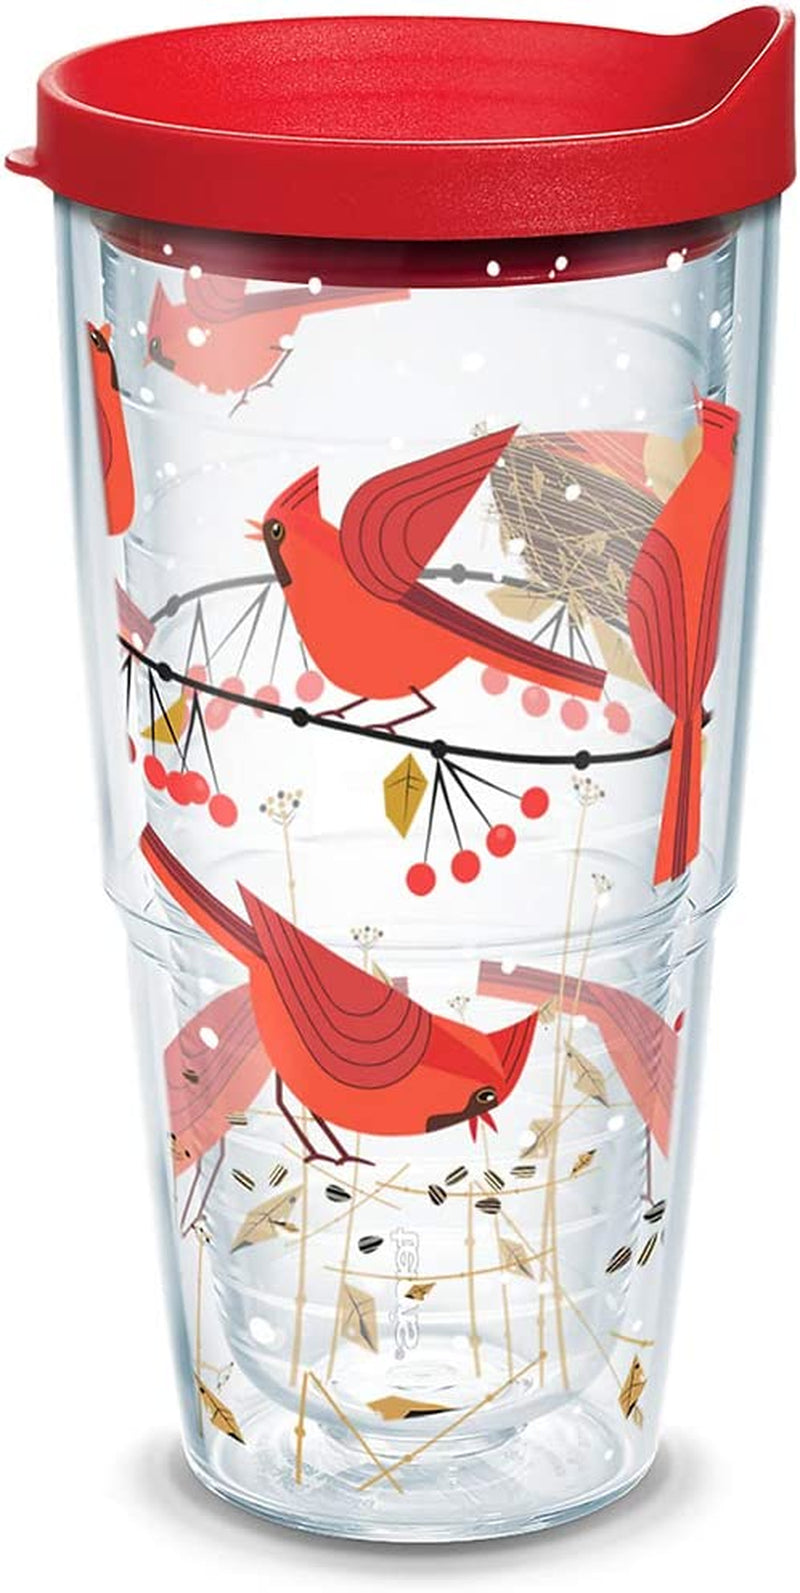 Tervis Made in USA Double Walled Festive Holiday Season Cardinals Insulated Tumbler Cup Keeps Drinks Cold & Hot, 16Oz Mug, Classic Home & Garden > Kitchen & Dining > Tableware > Drinkware Tervis Classic 24oz 